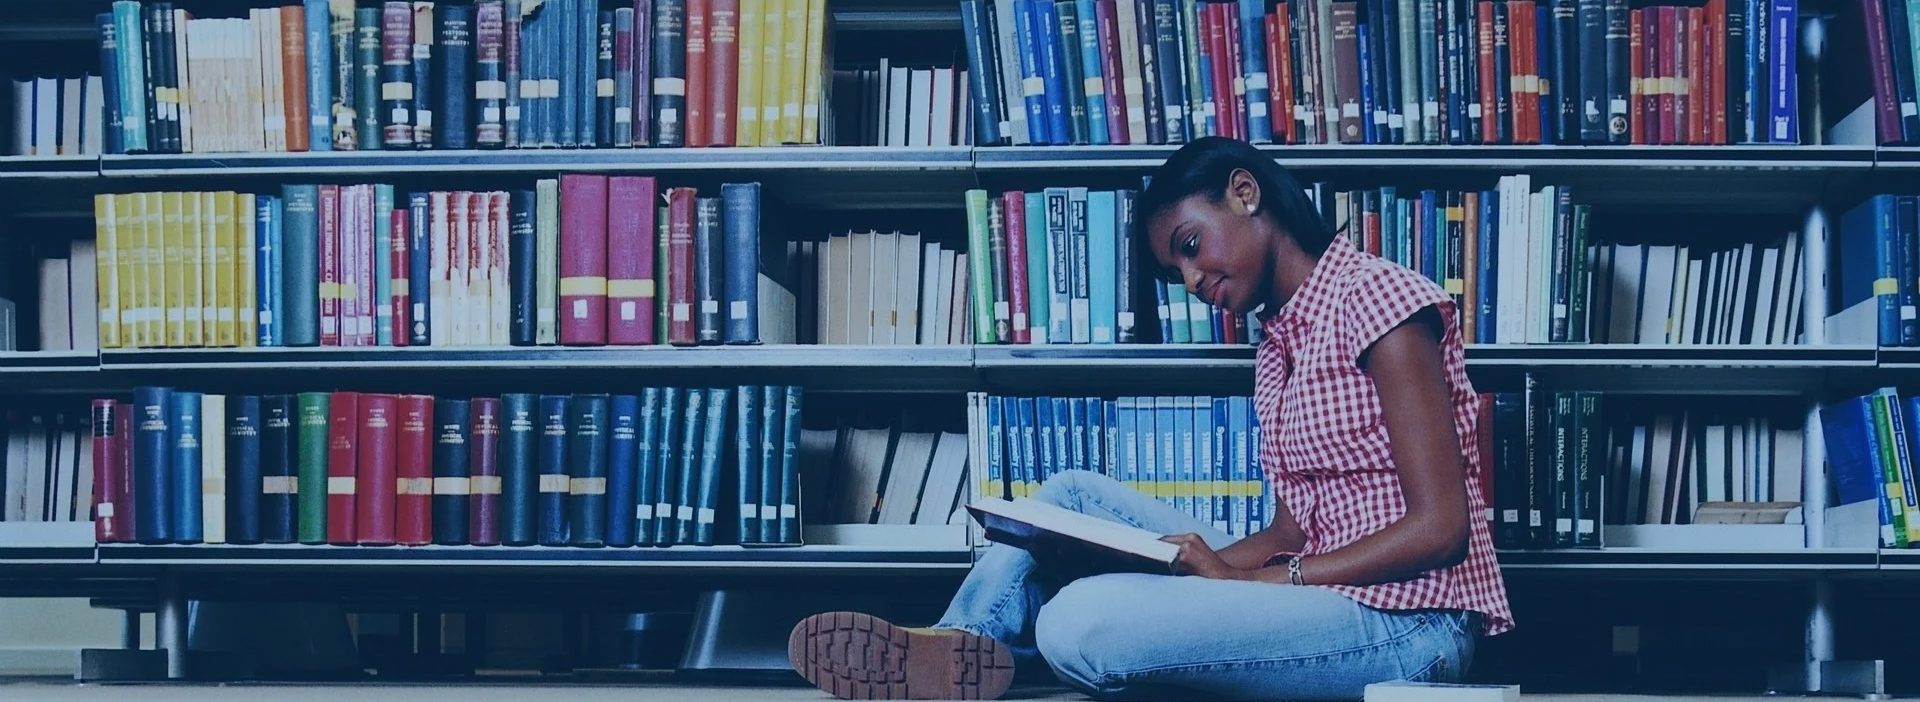 A girl sitting on the floor reading in front of some books